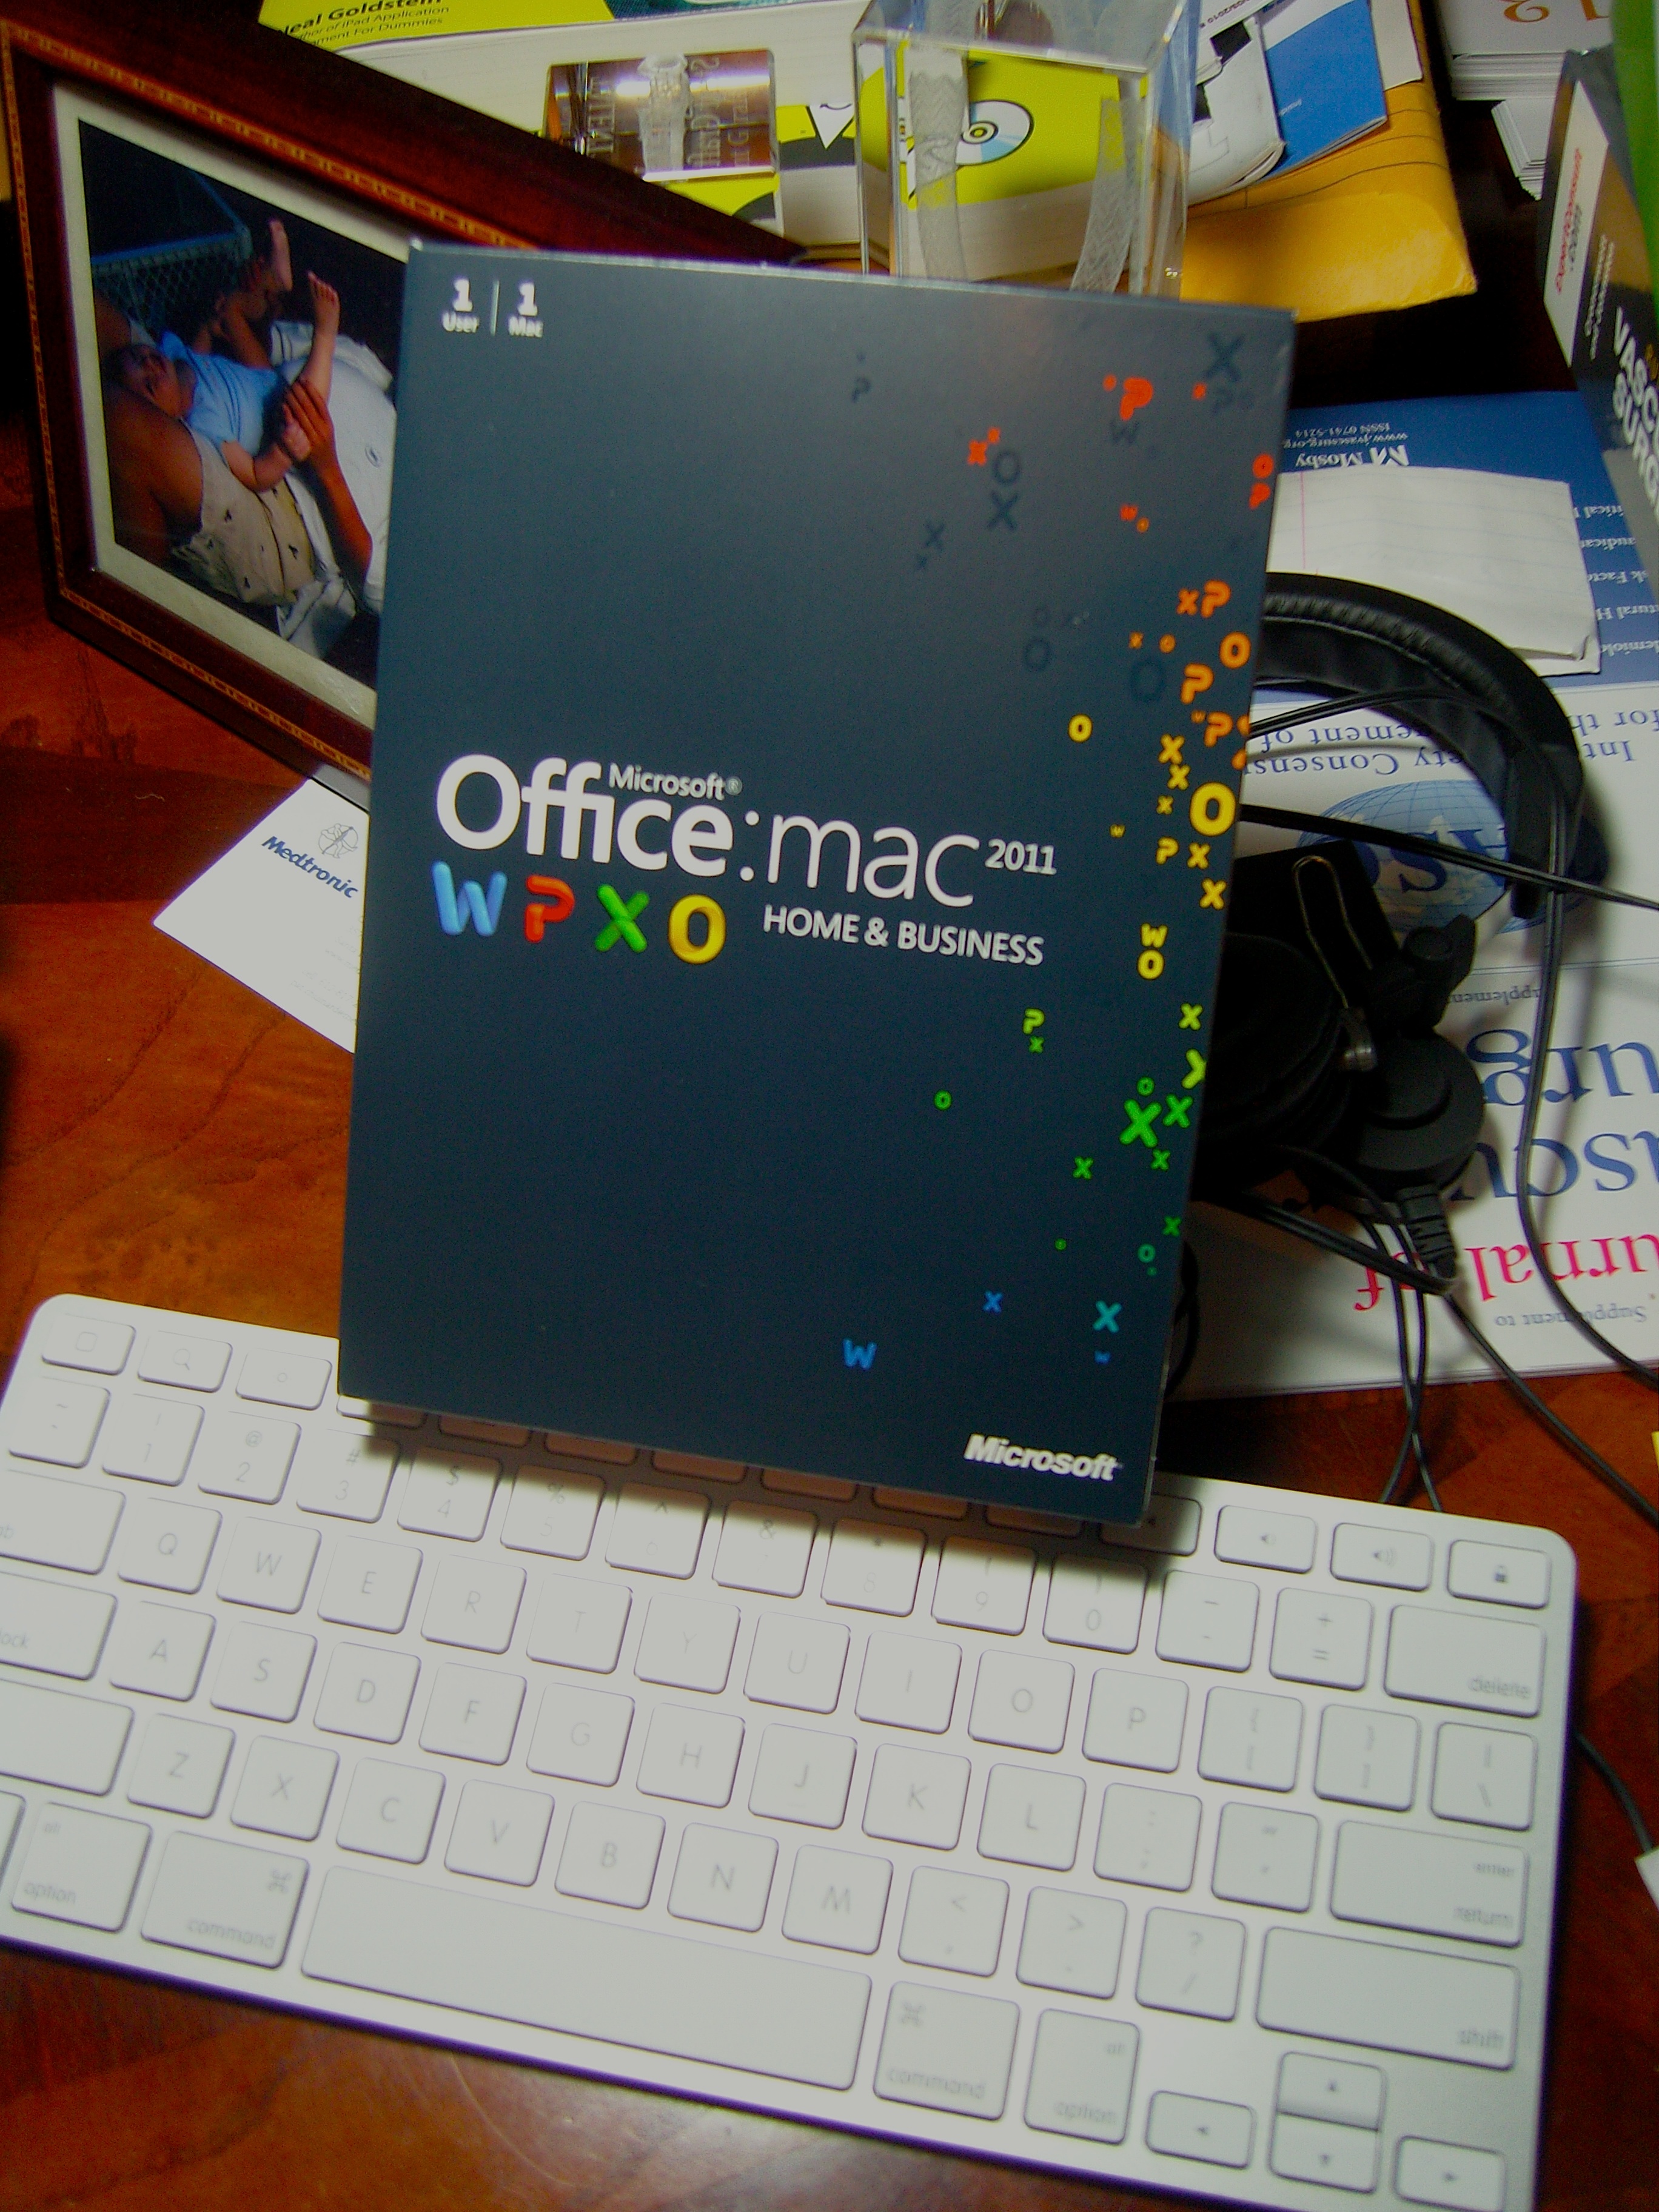 Microsoft Office Free Download Full Version For Macbook Pro